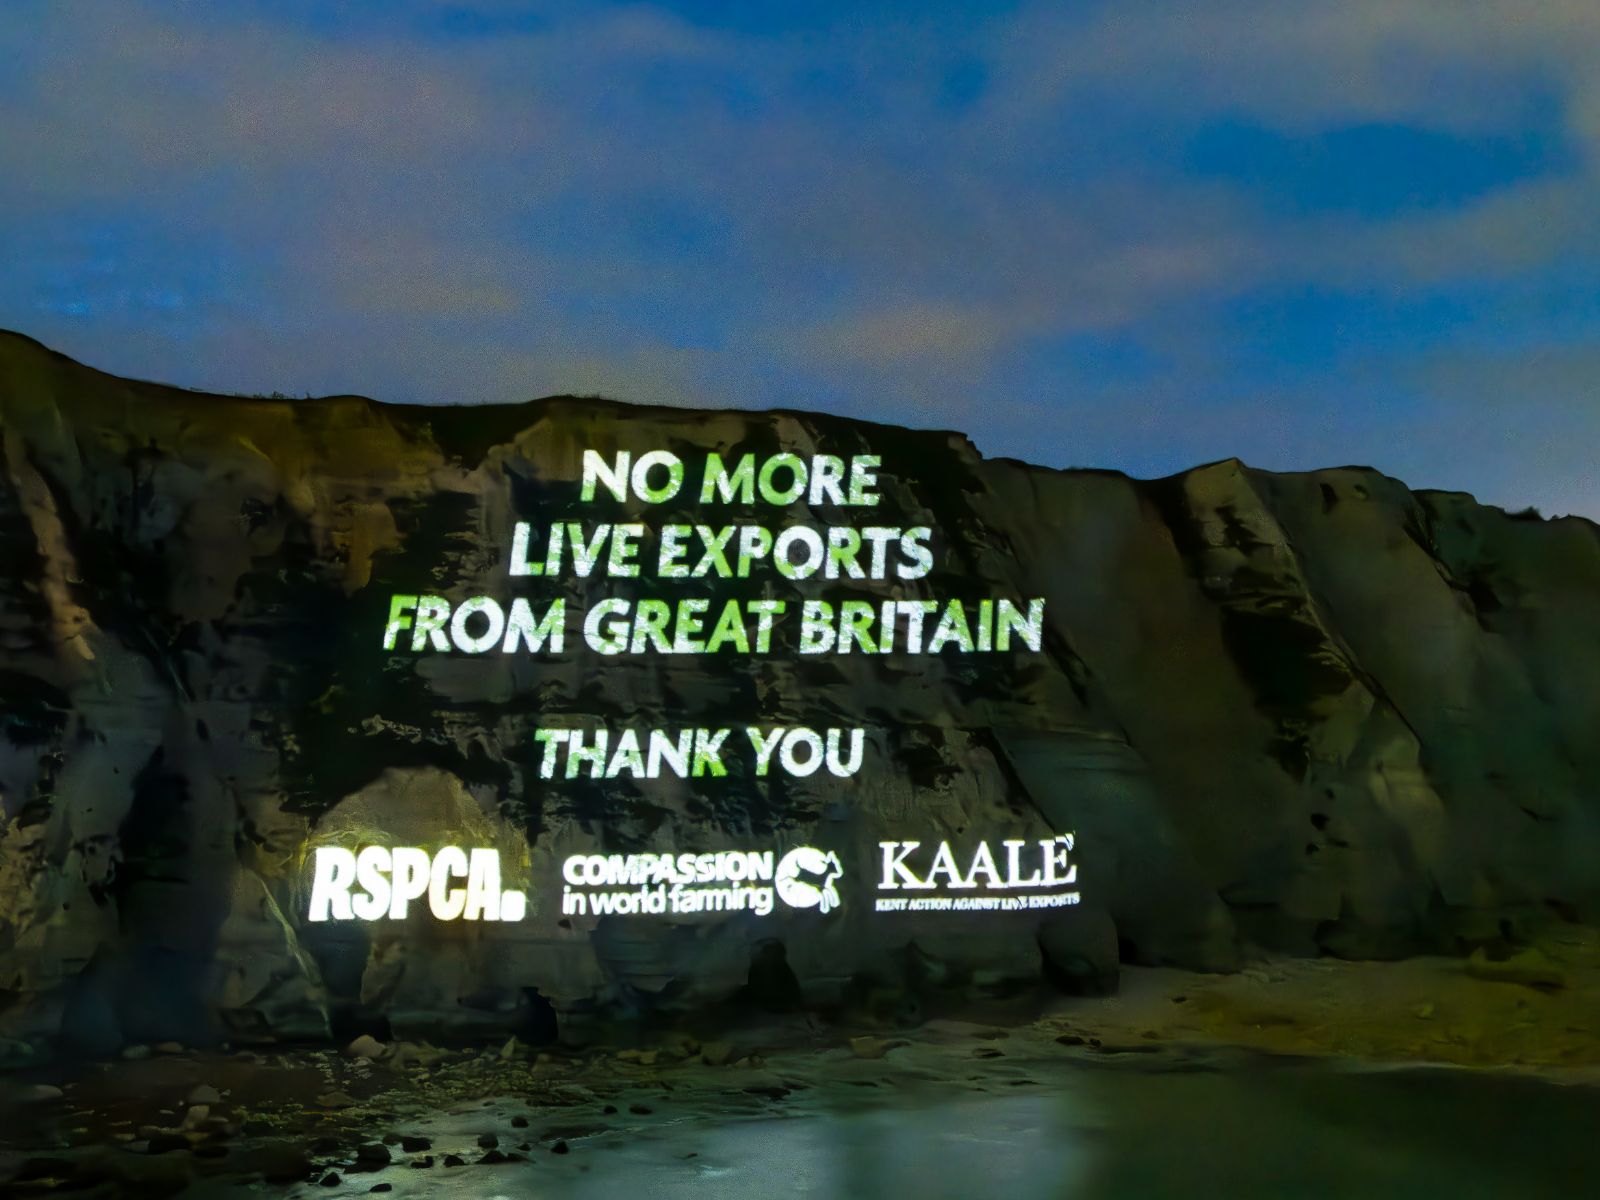 Dover Cliffs projection image announcing ban on live exports from Great Britain